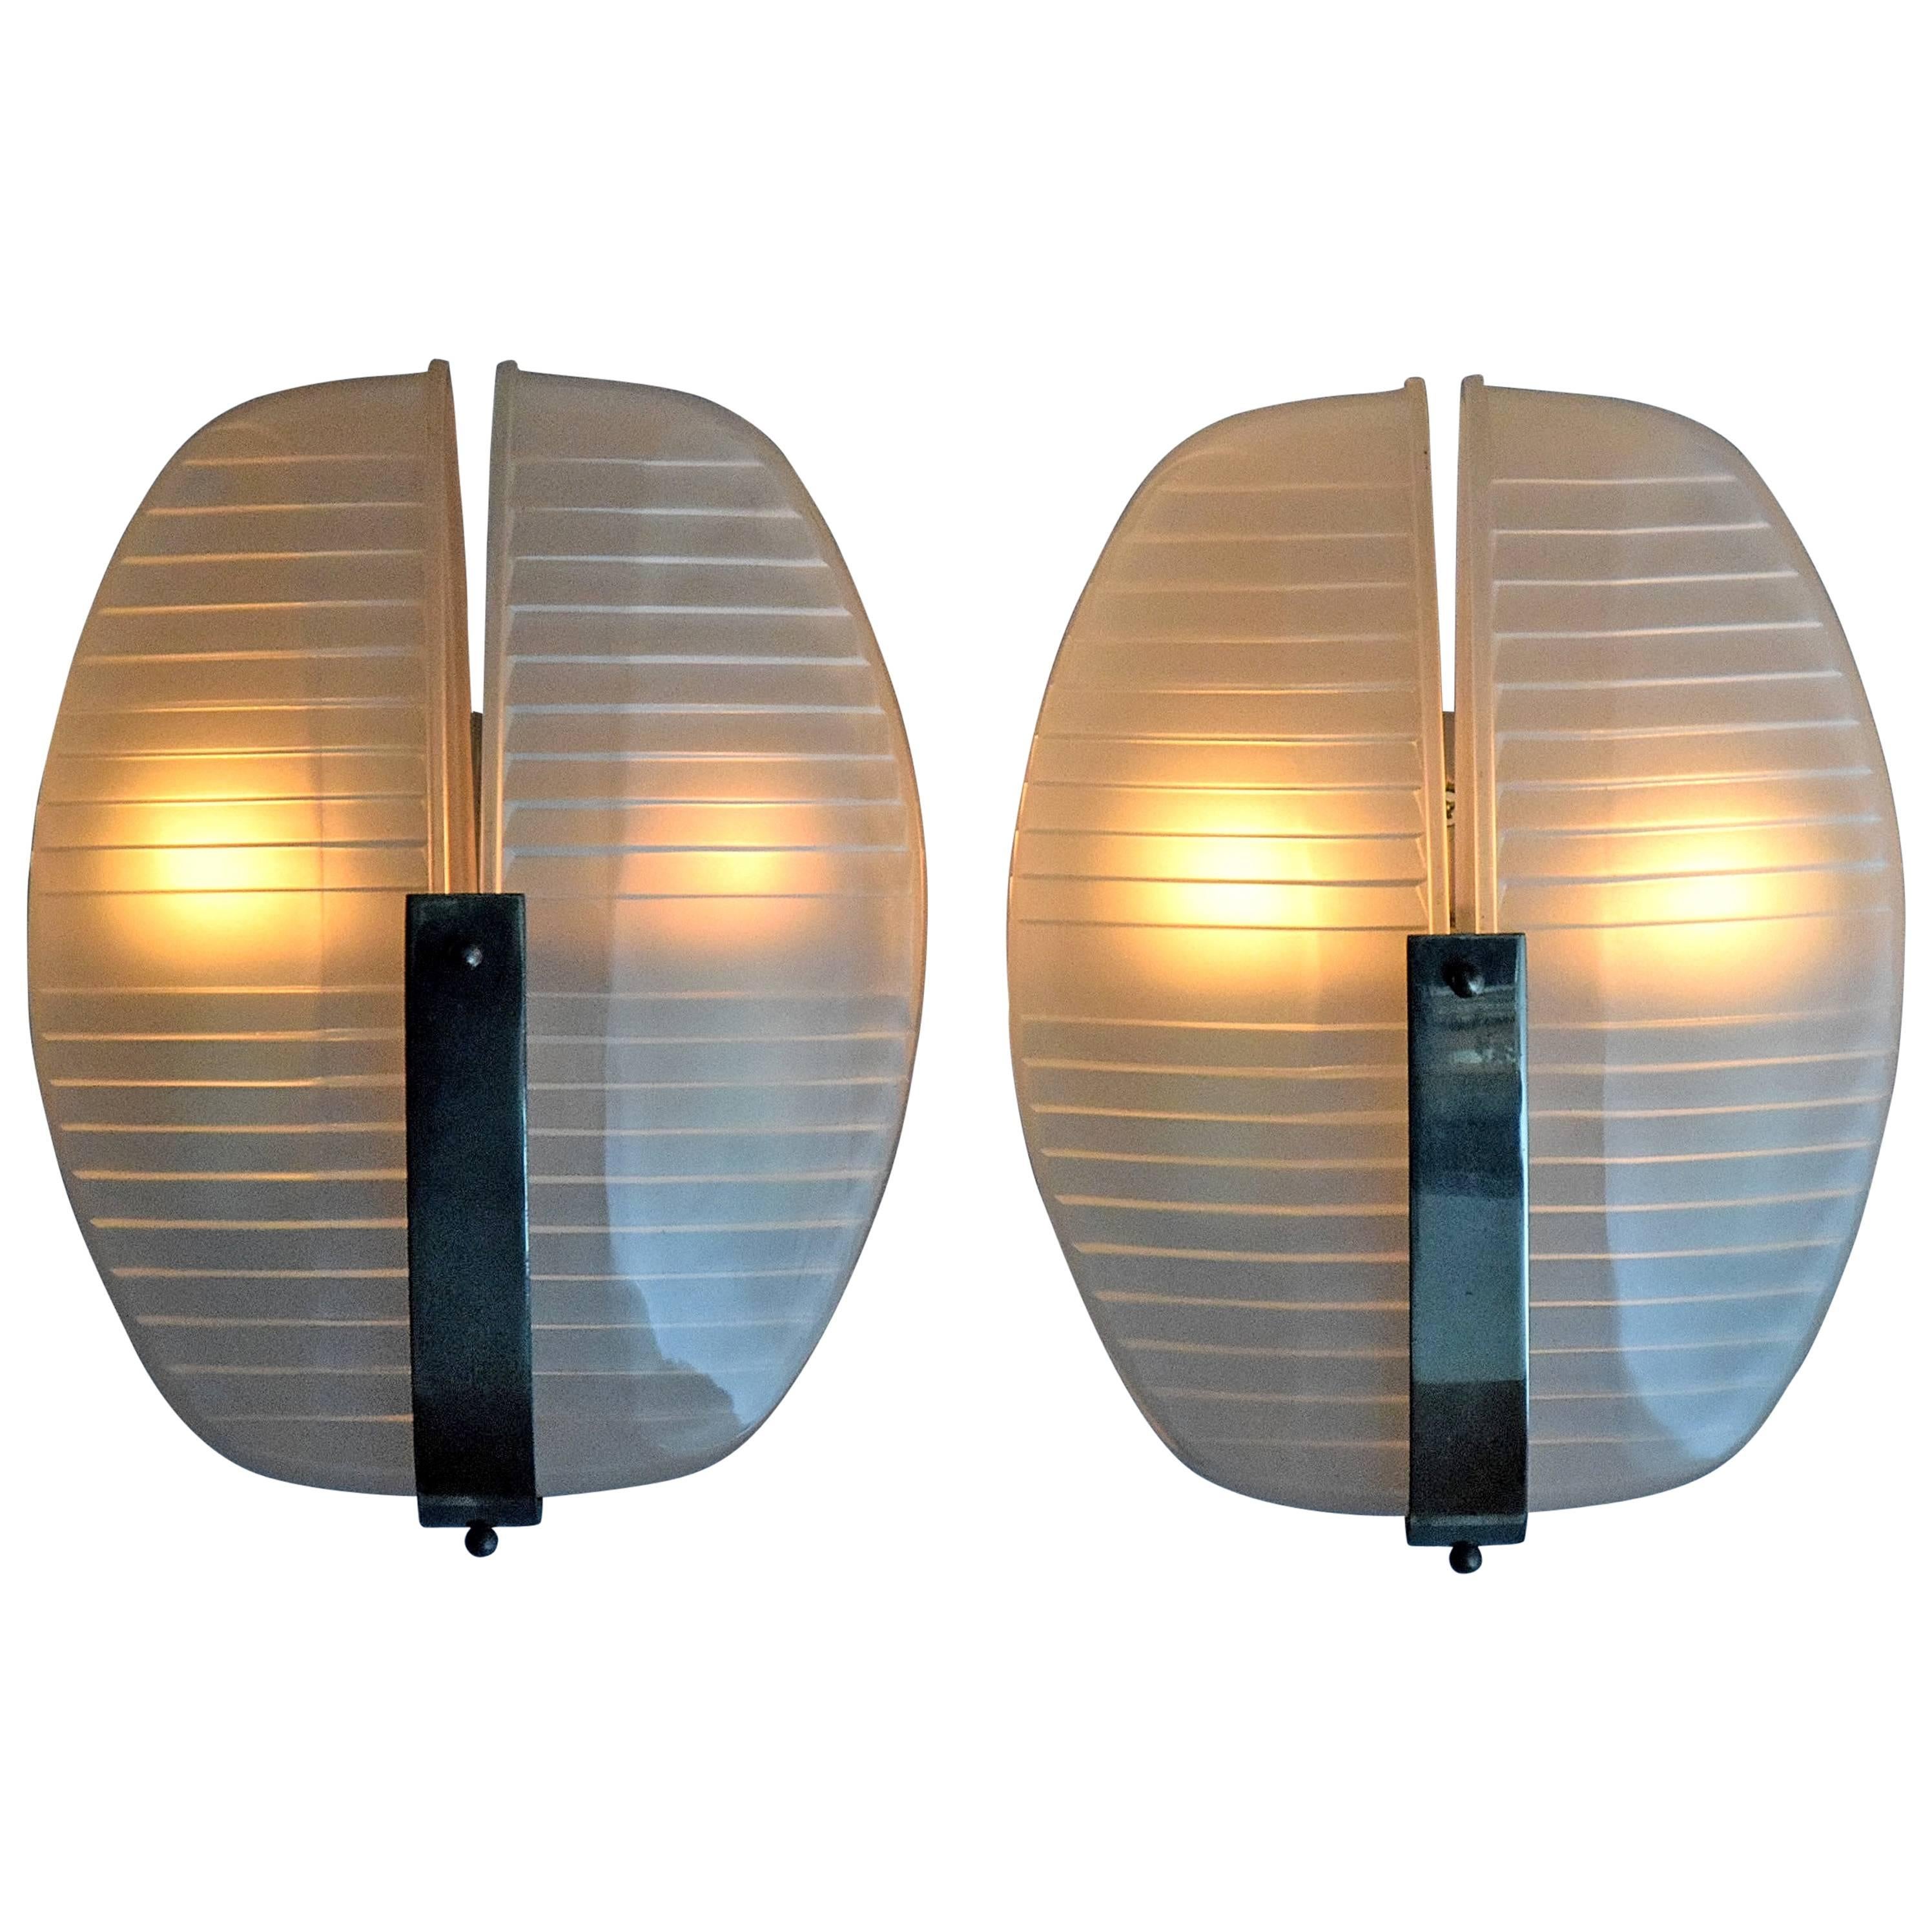 Mid century modern Sconces by Vico Magistretti for Artemide